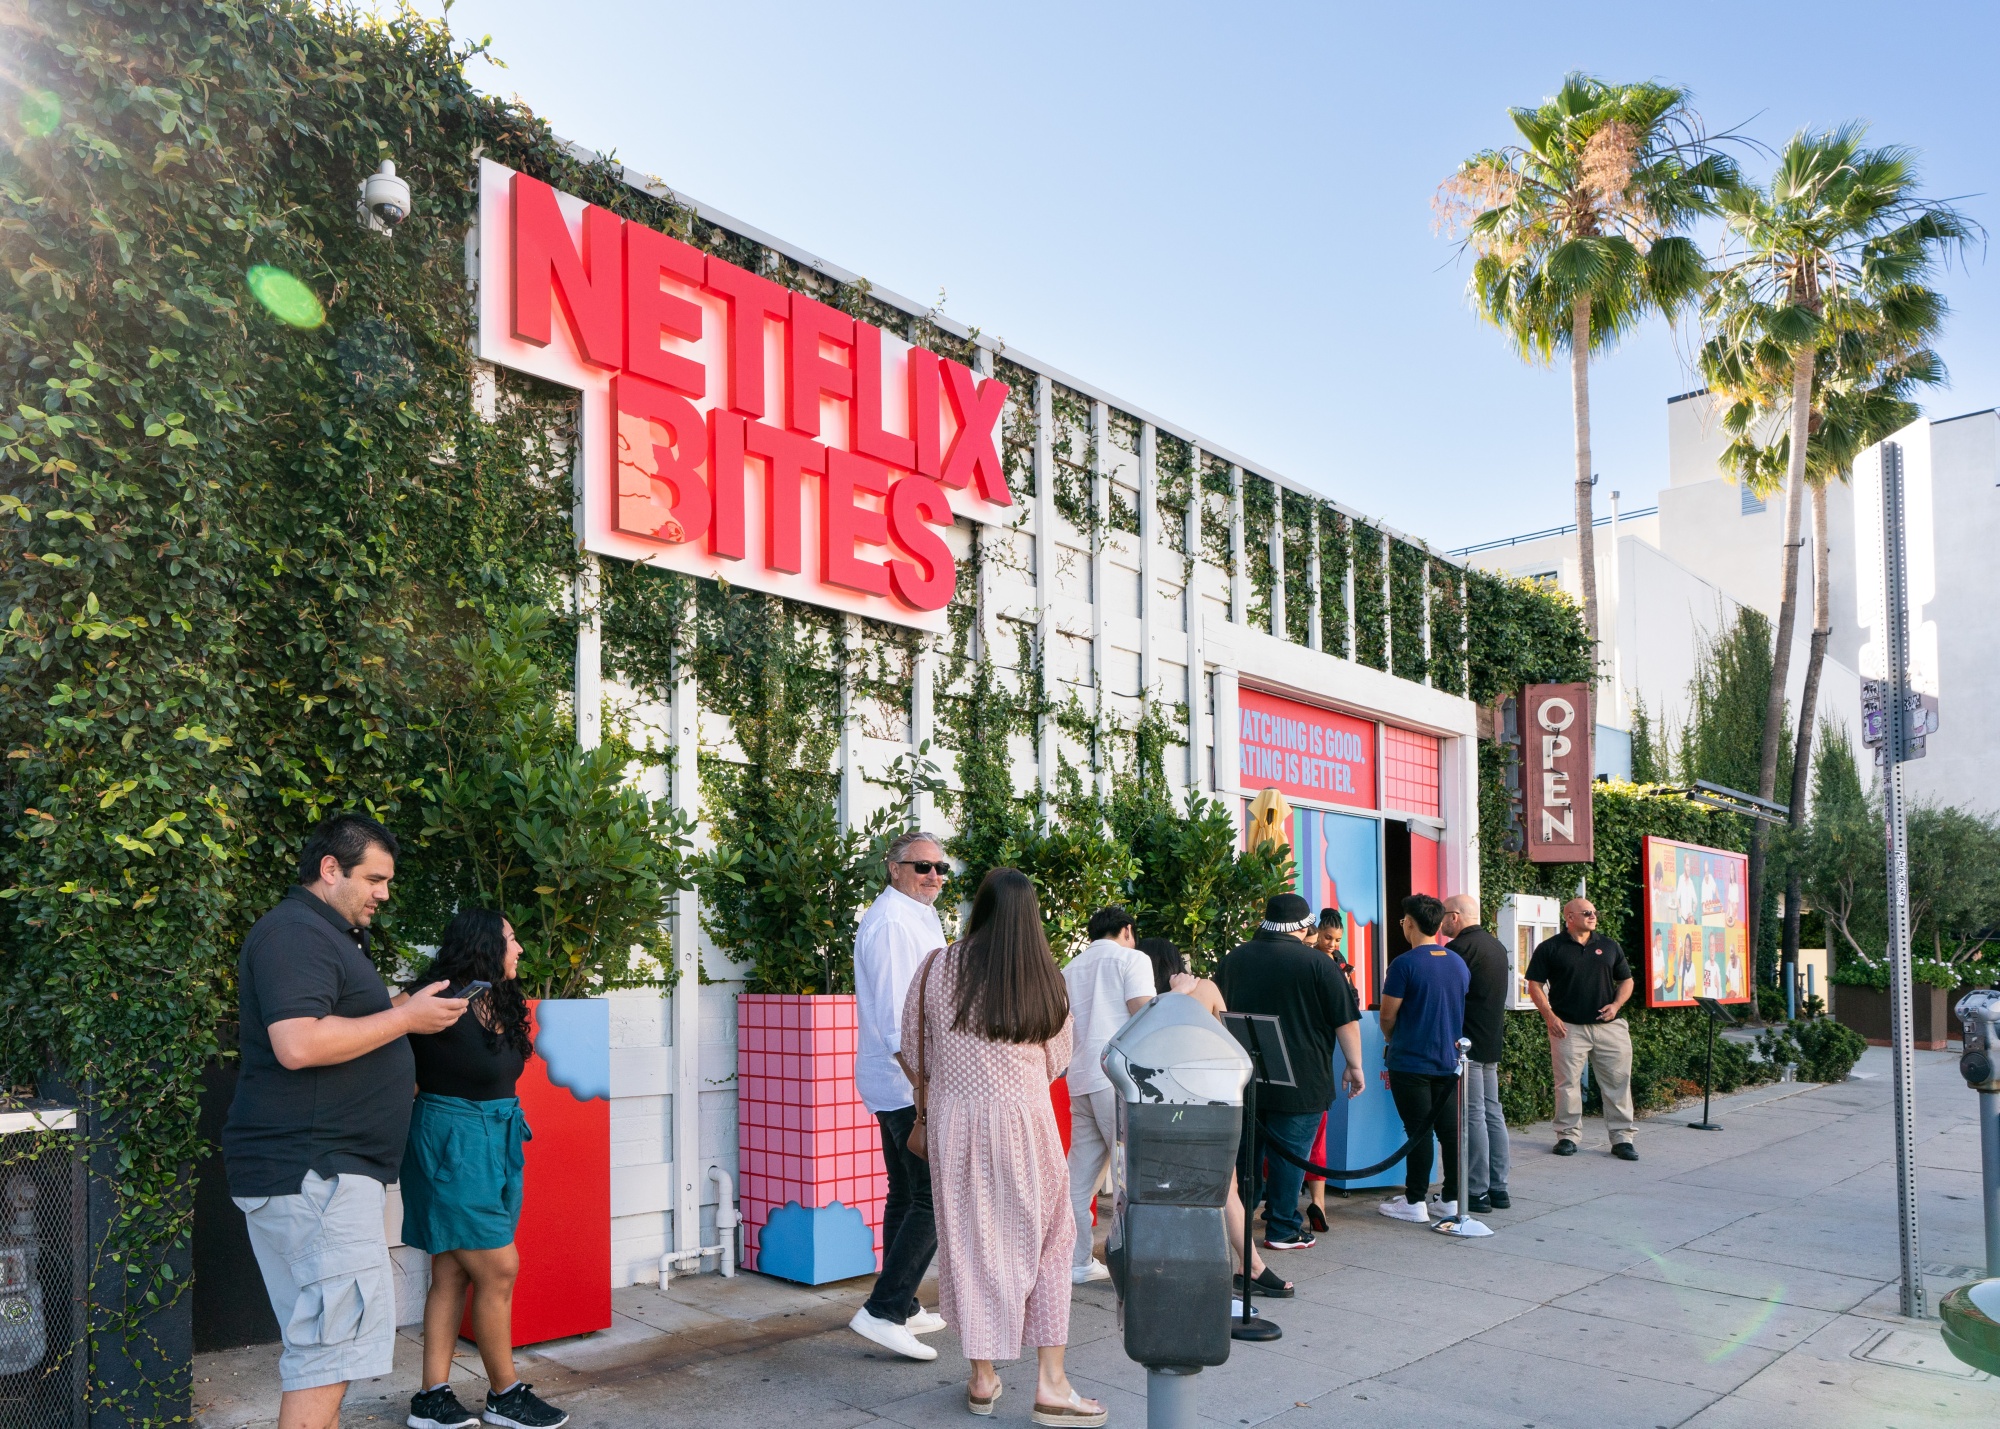 Netflix House Stores Open in 2025 to Rival Theme Park Marketing